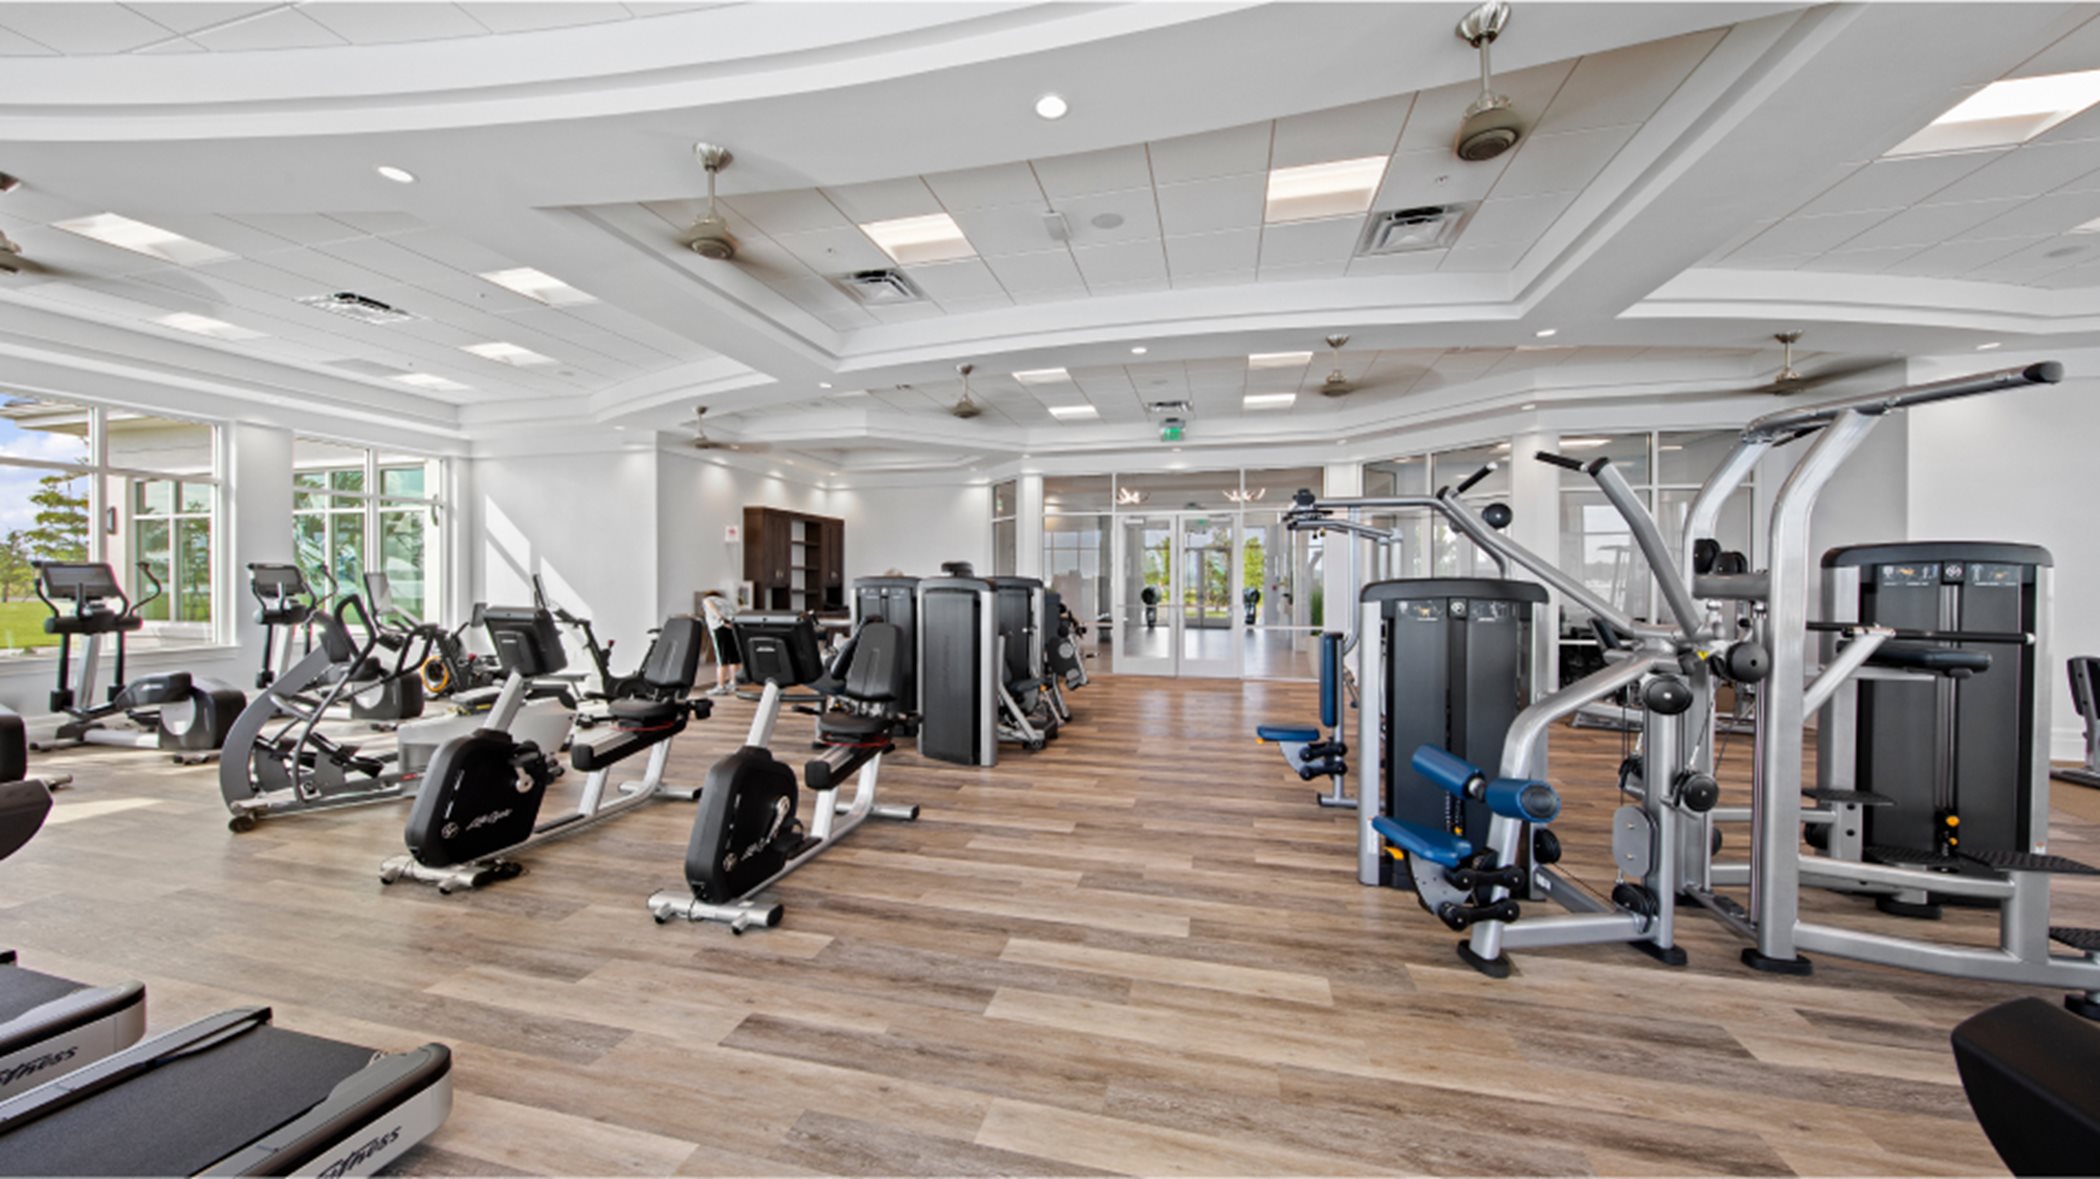 WildBlue sports club exercise room